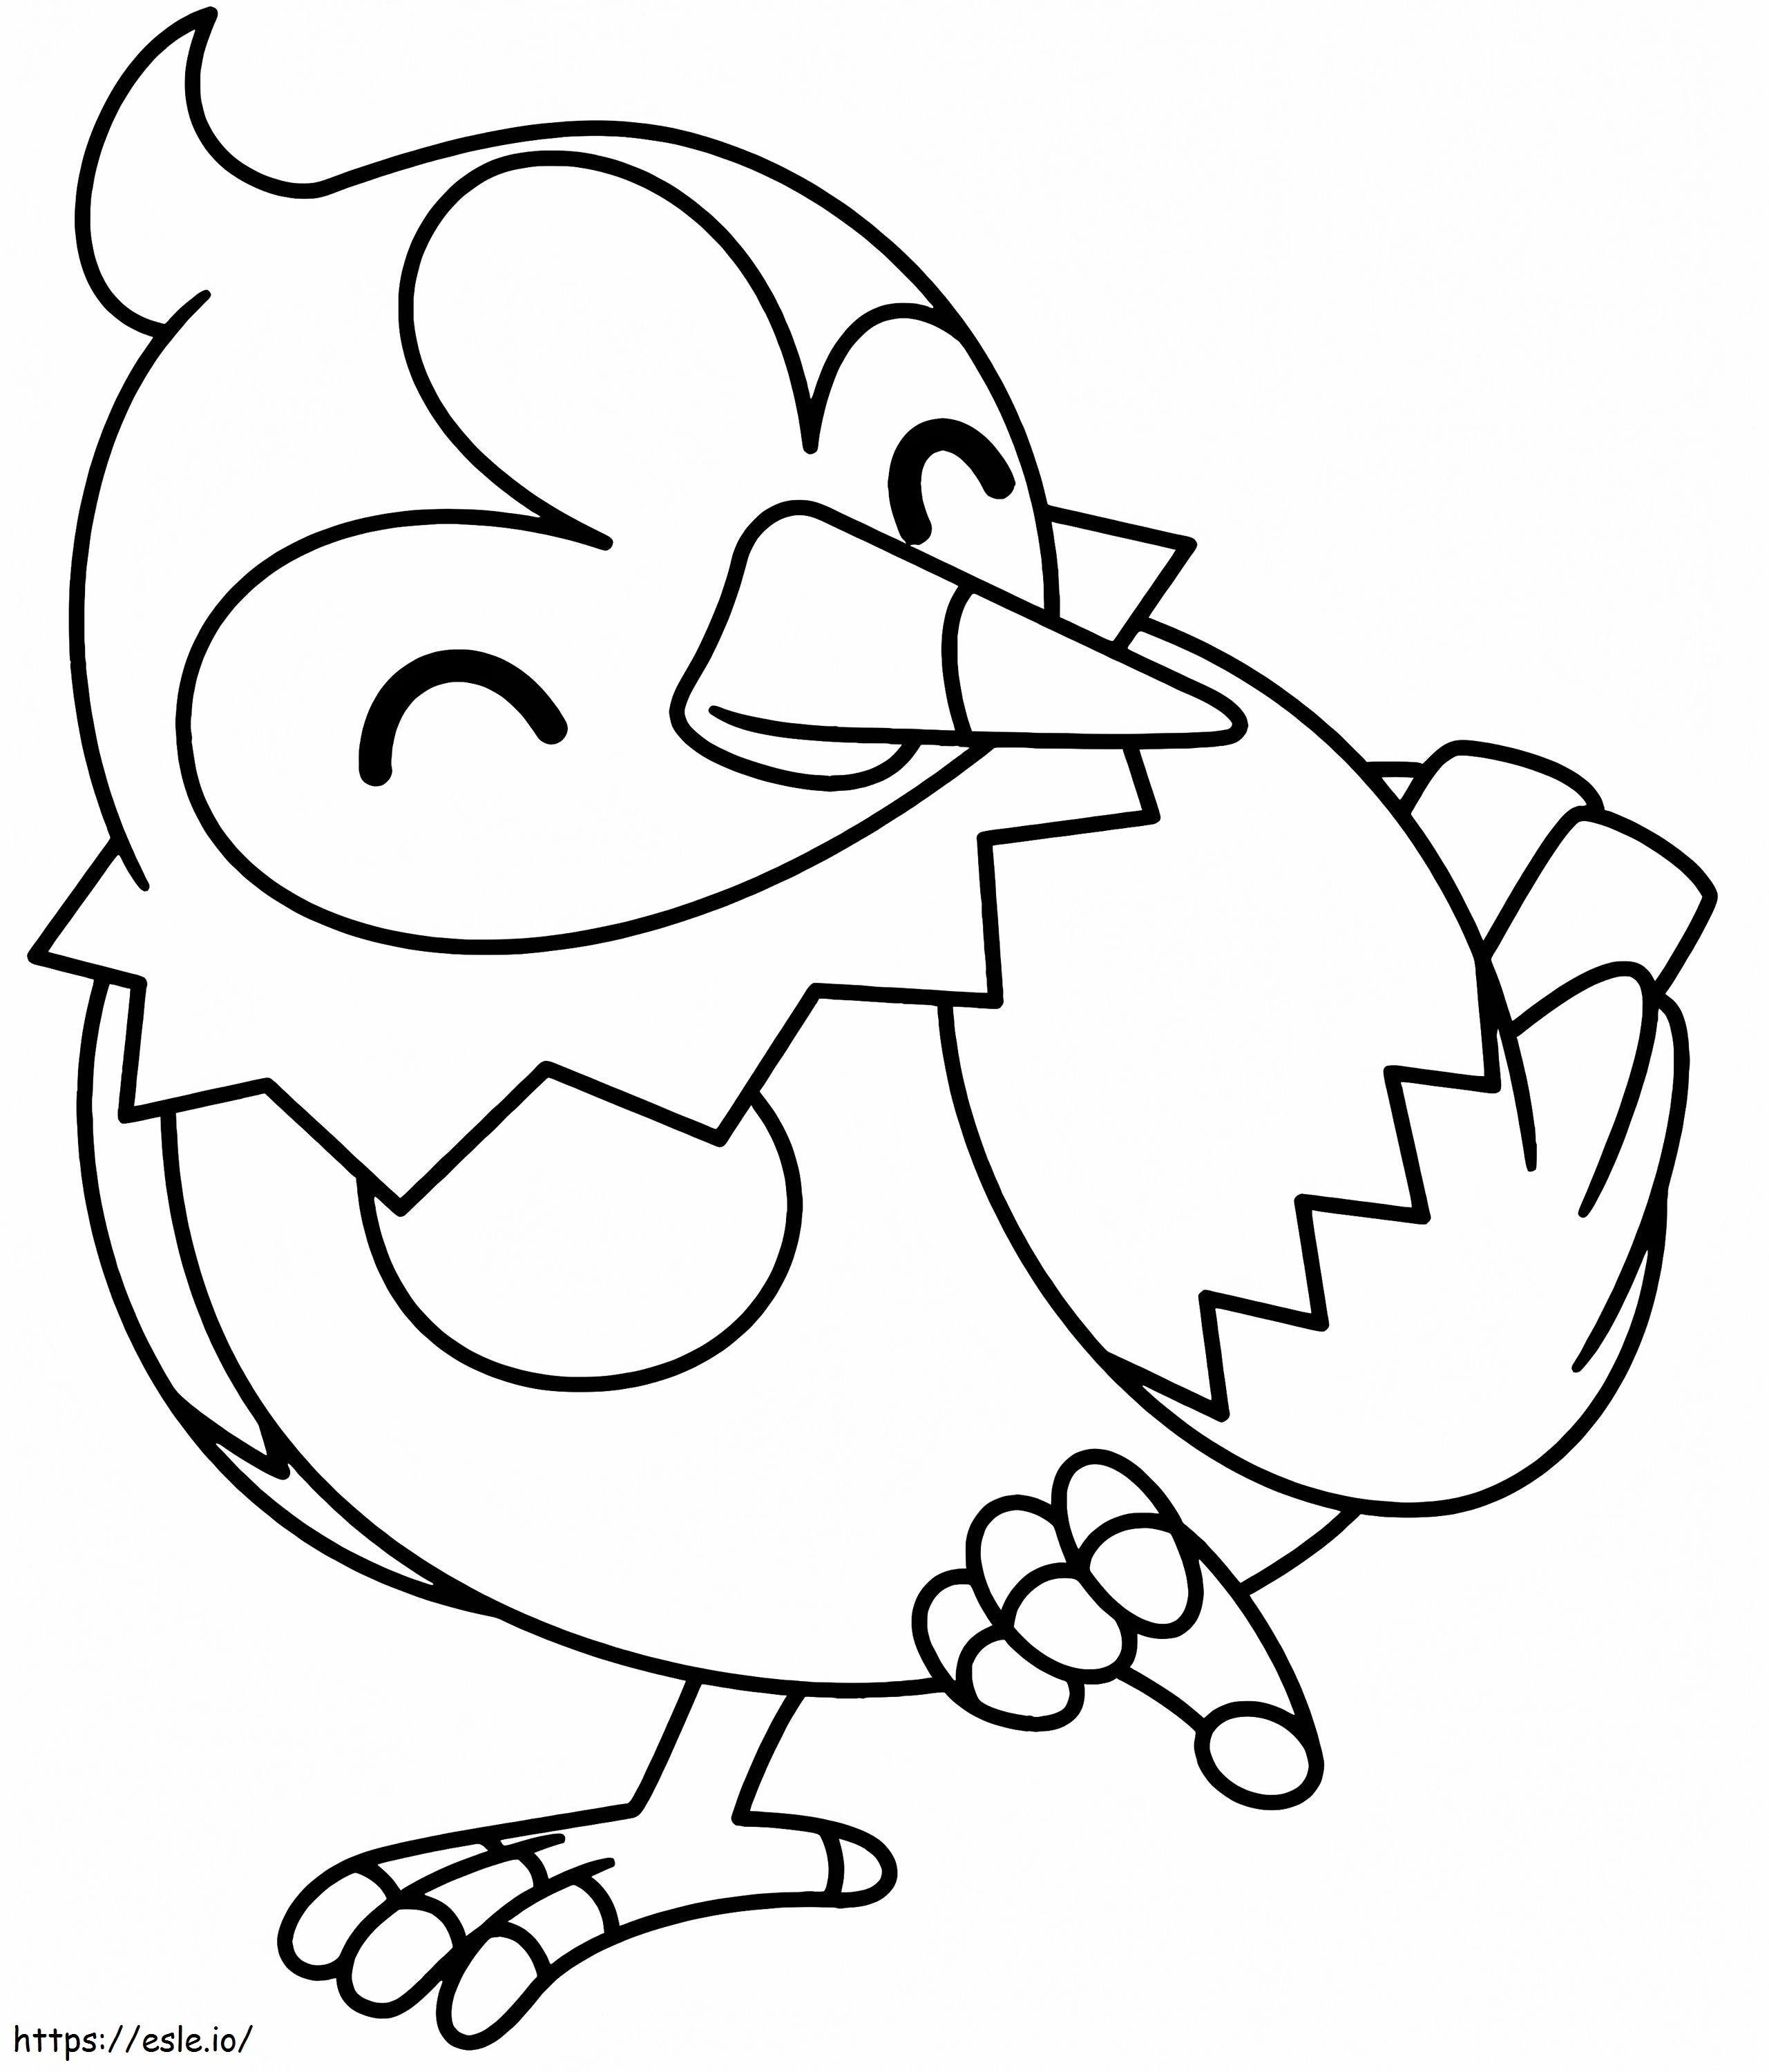 Cute Starly coloring page